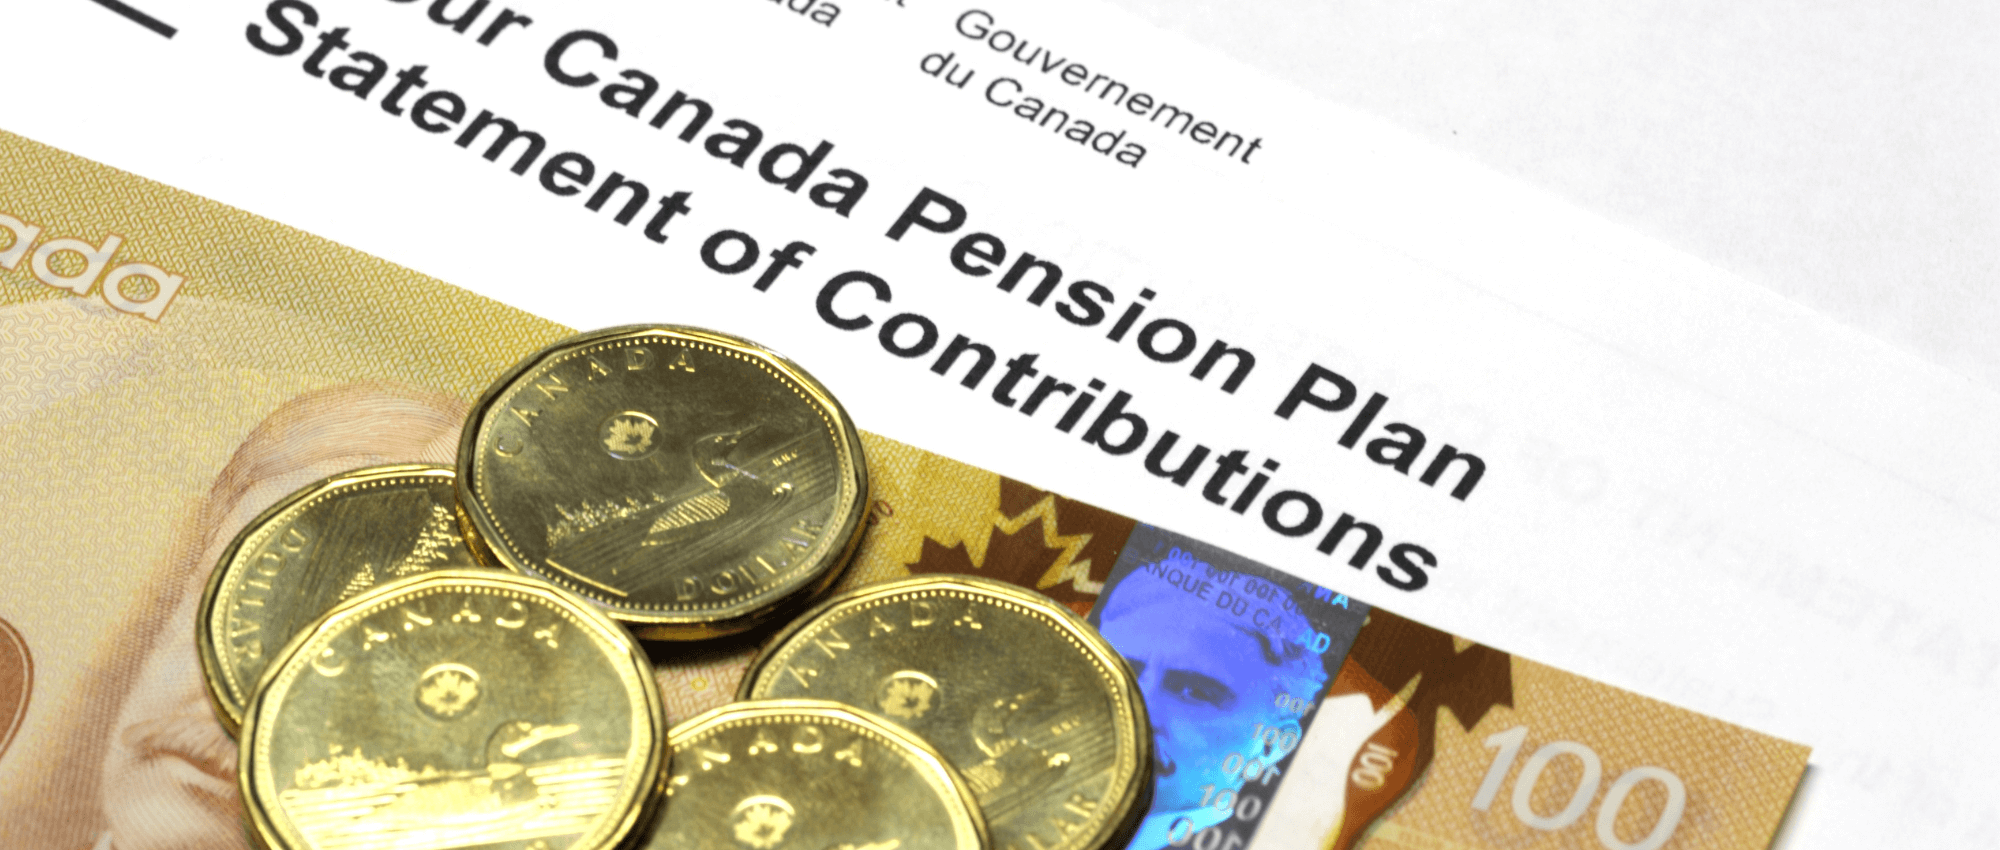 canada pension form with money